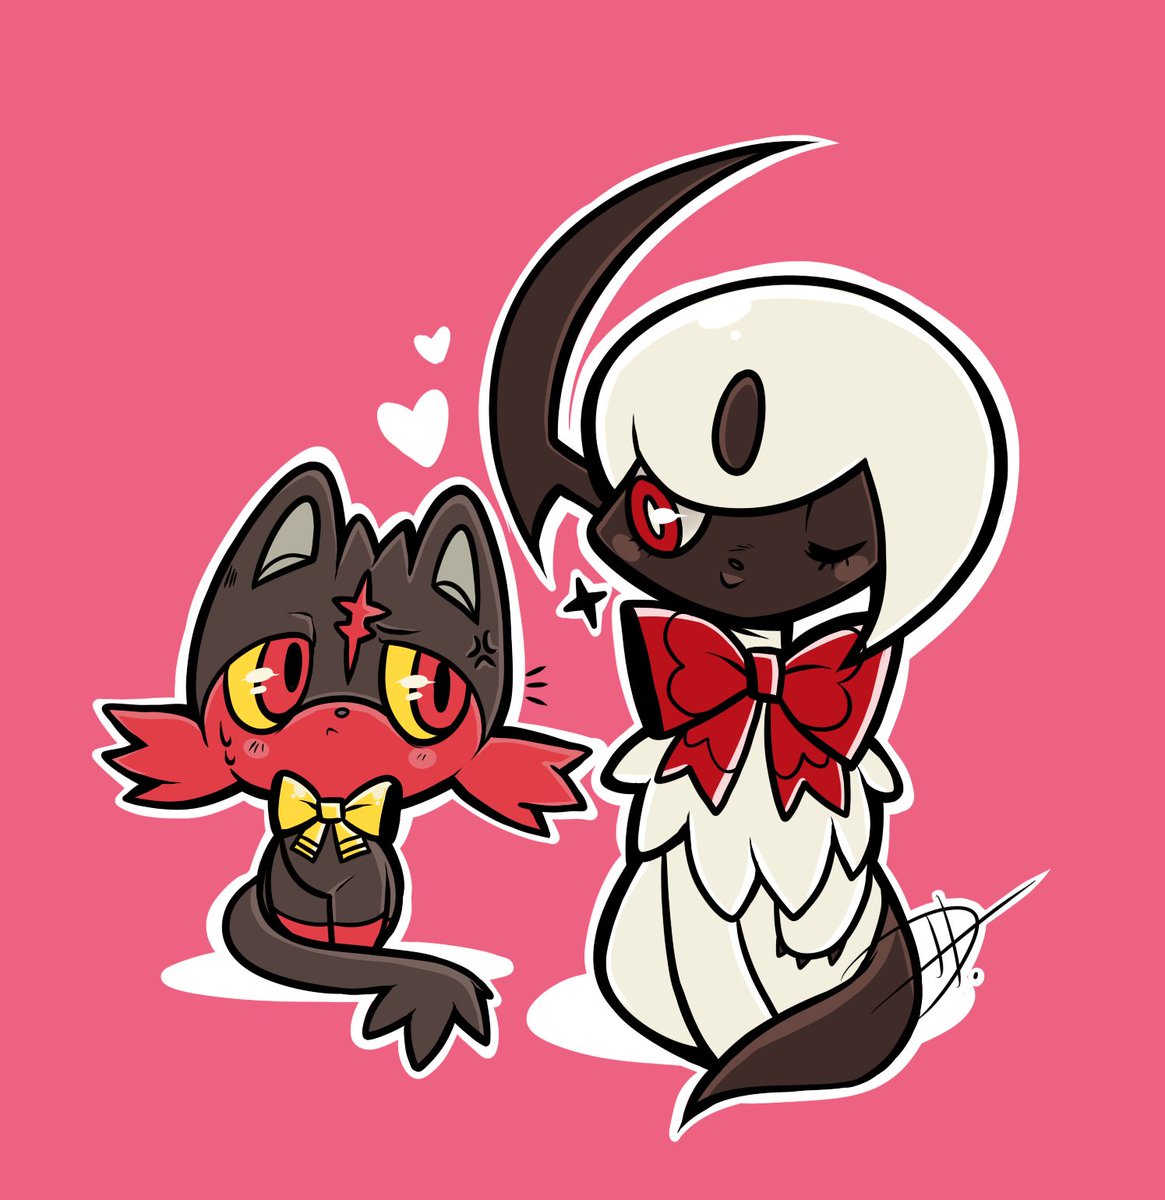 Melonparfait Vtuber Looking Forward To Pokemongo In The Mean Time I Ll Enjoy Drawing Edgy Pokemon With Cute Ribbons Litten Absol